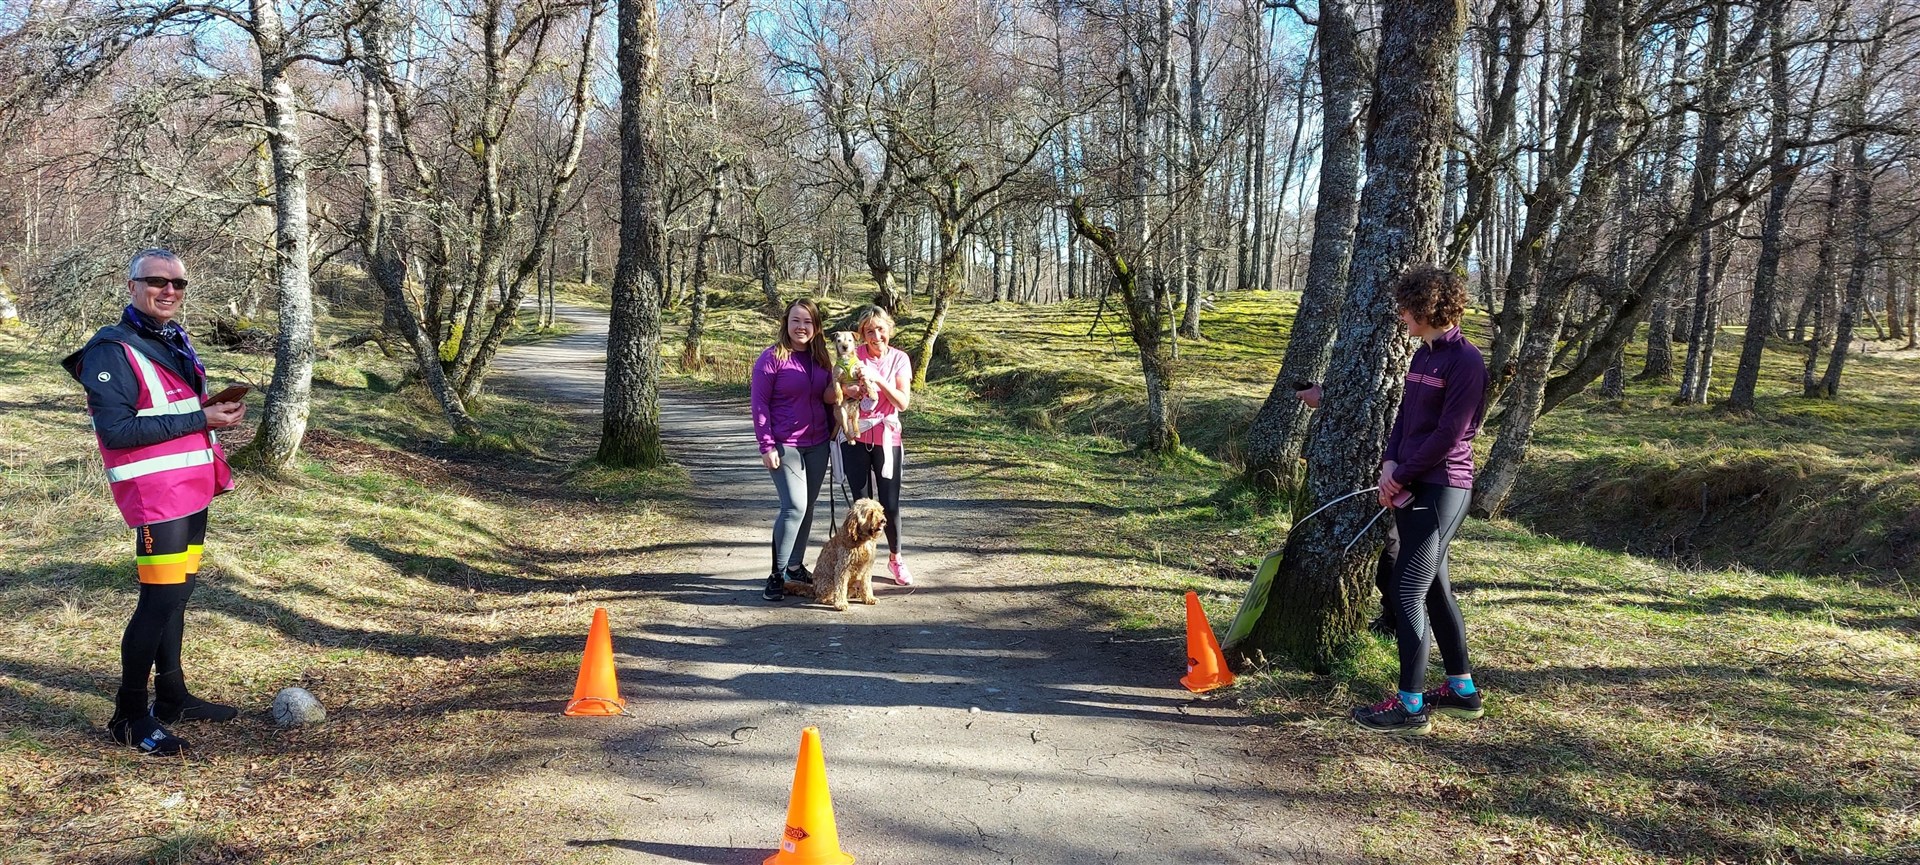 Every participant is allowed to bring a dog with them, as long as it's on a short lead. More are being encouraged to take part now.